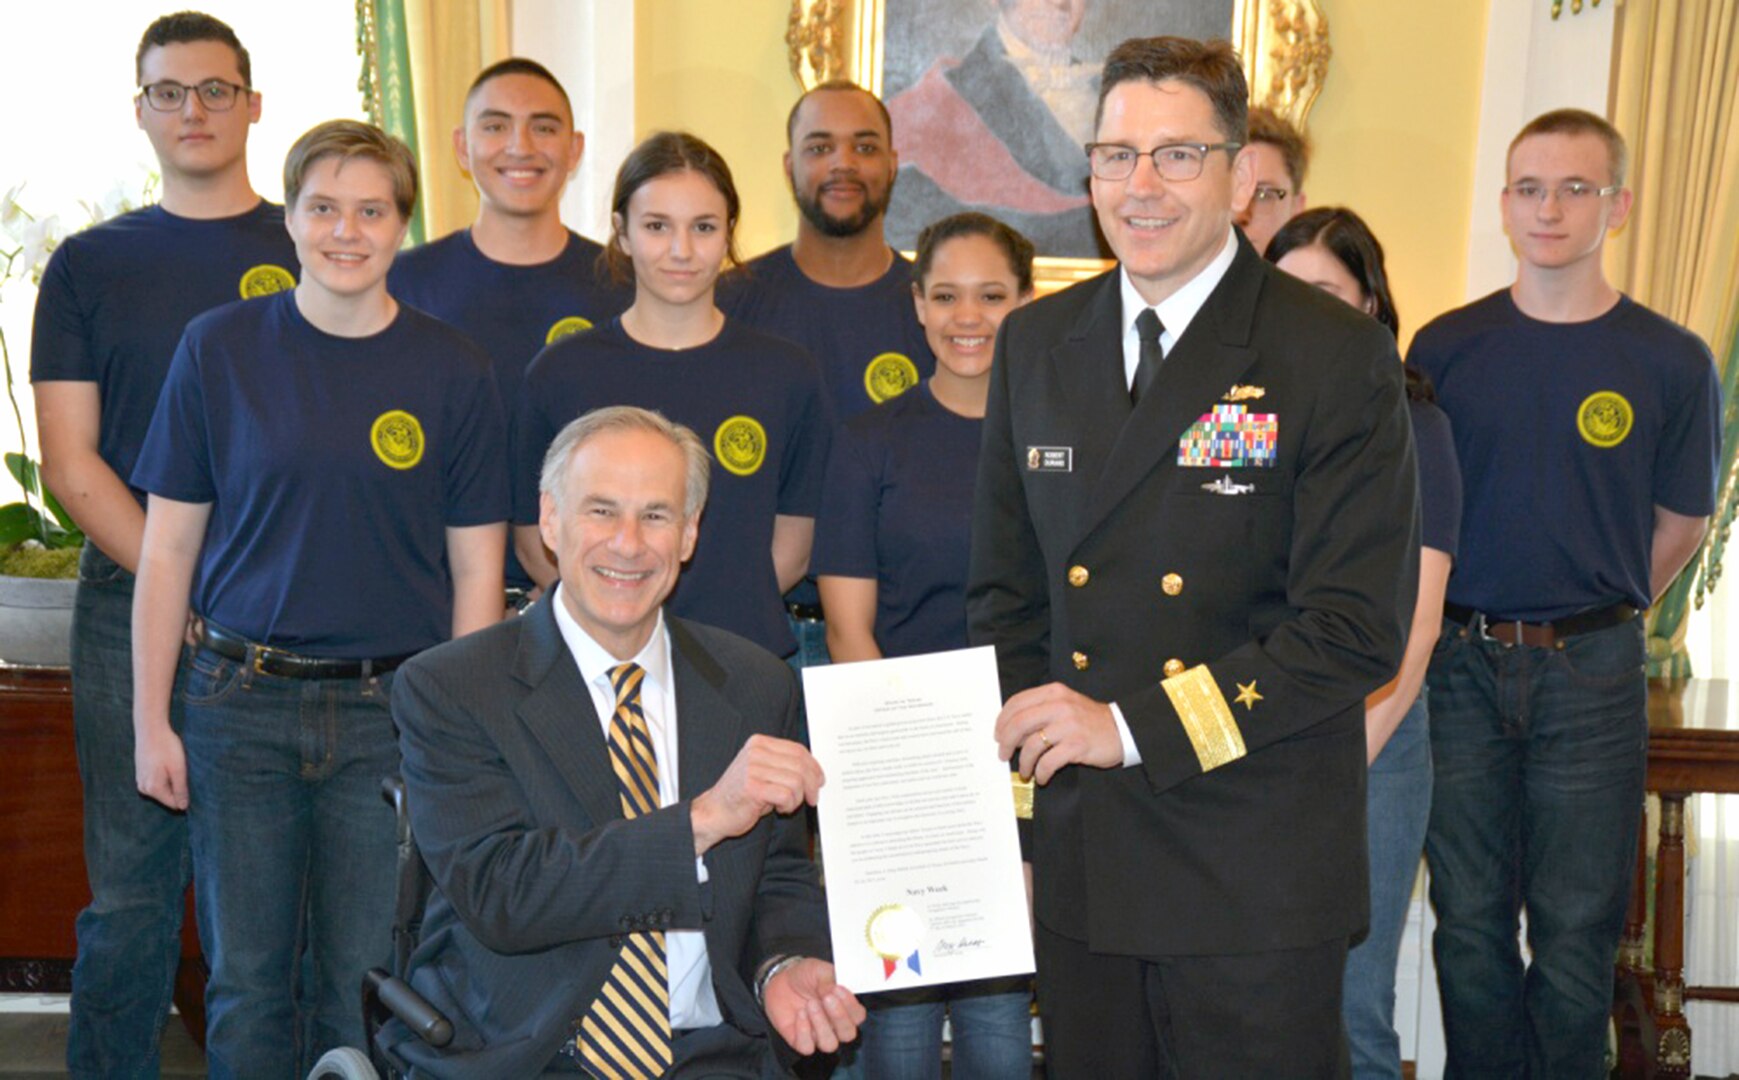 Texas Governor Greg Abbott delivers a proclamation to Navy Vice Chief of Information Rear Adm. Robert Durand after administrating the Oath of Enlistment to 10 future Sailors of Navy Recruiting District San Antonio at the governor’s mansion during Navy Week. Texas’s capital is hosting members of the U.S. Navy during Austin Navy Week, March 18-24, coinciding with Rodeo Austin and Stock Show. Austin Navy Week is the second of 15 Navy Weeks in 2017 which focus a variety of assets, equipment, and personnel on a single city for a weeklong series of engagements designed to bring America's Navy closer to the people it protects.